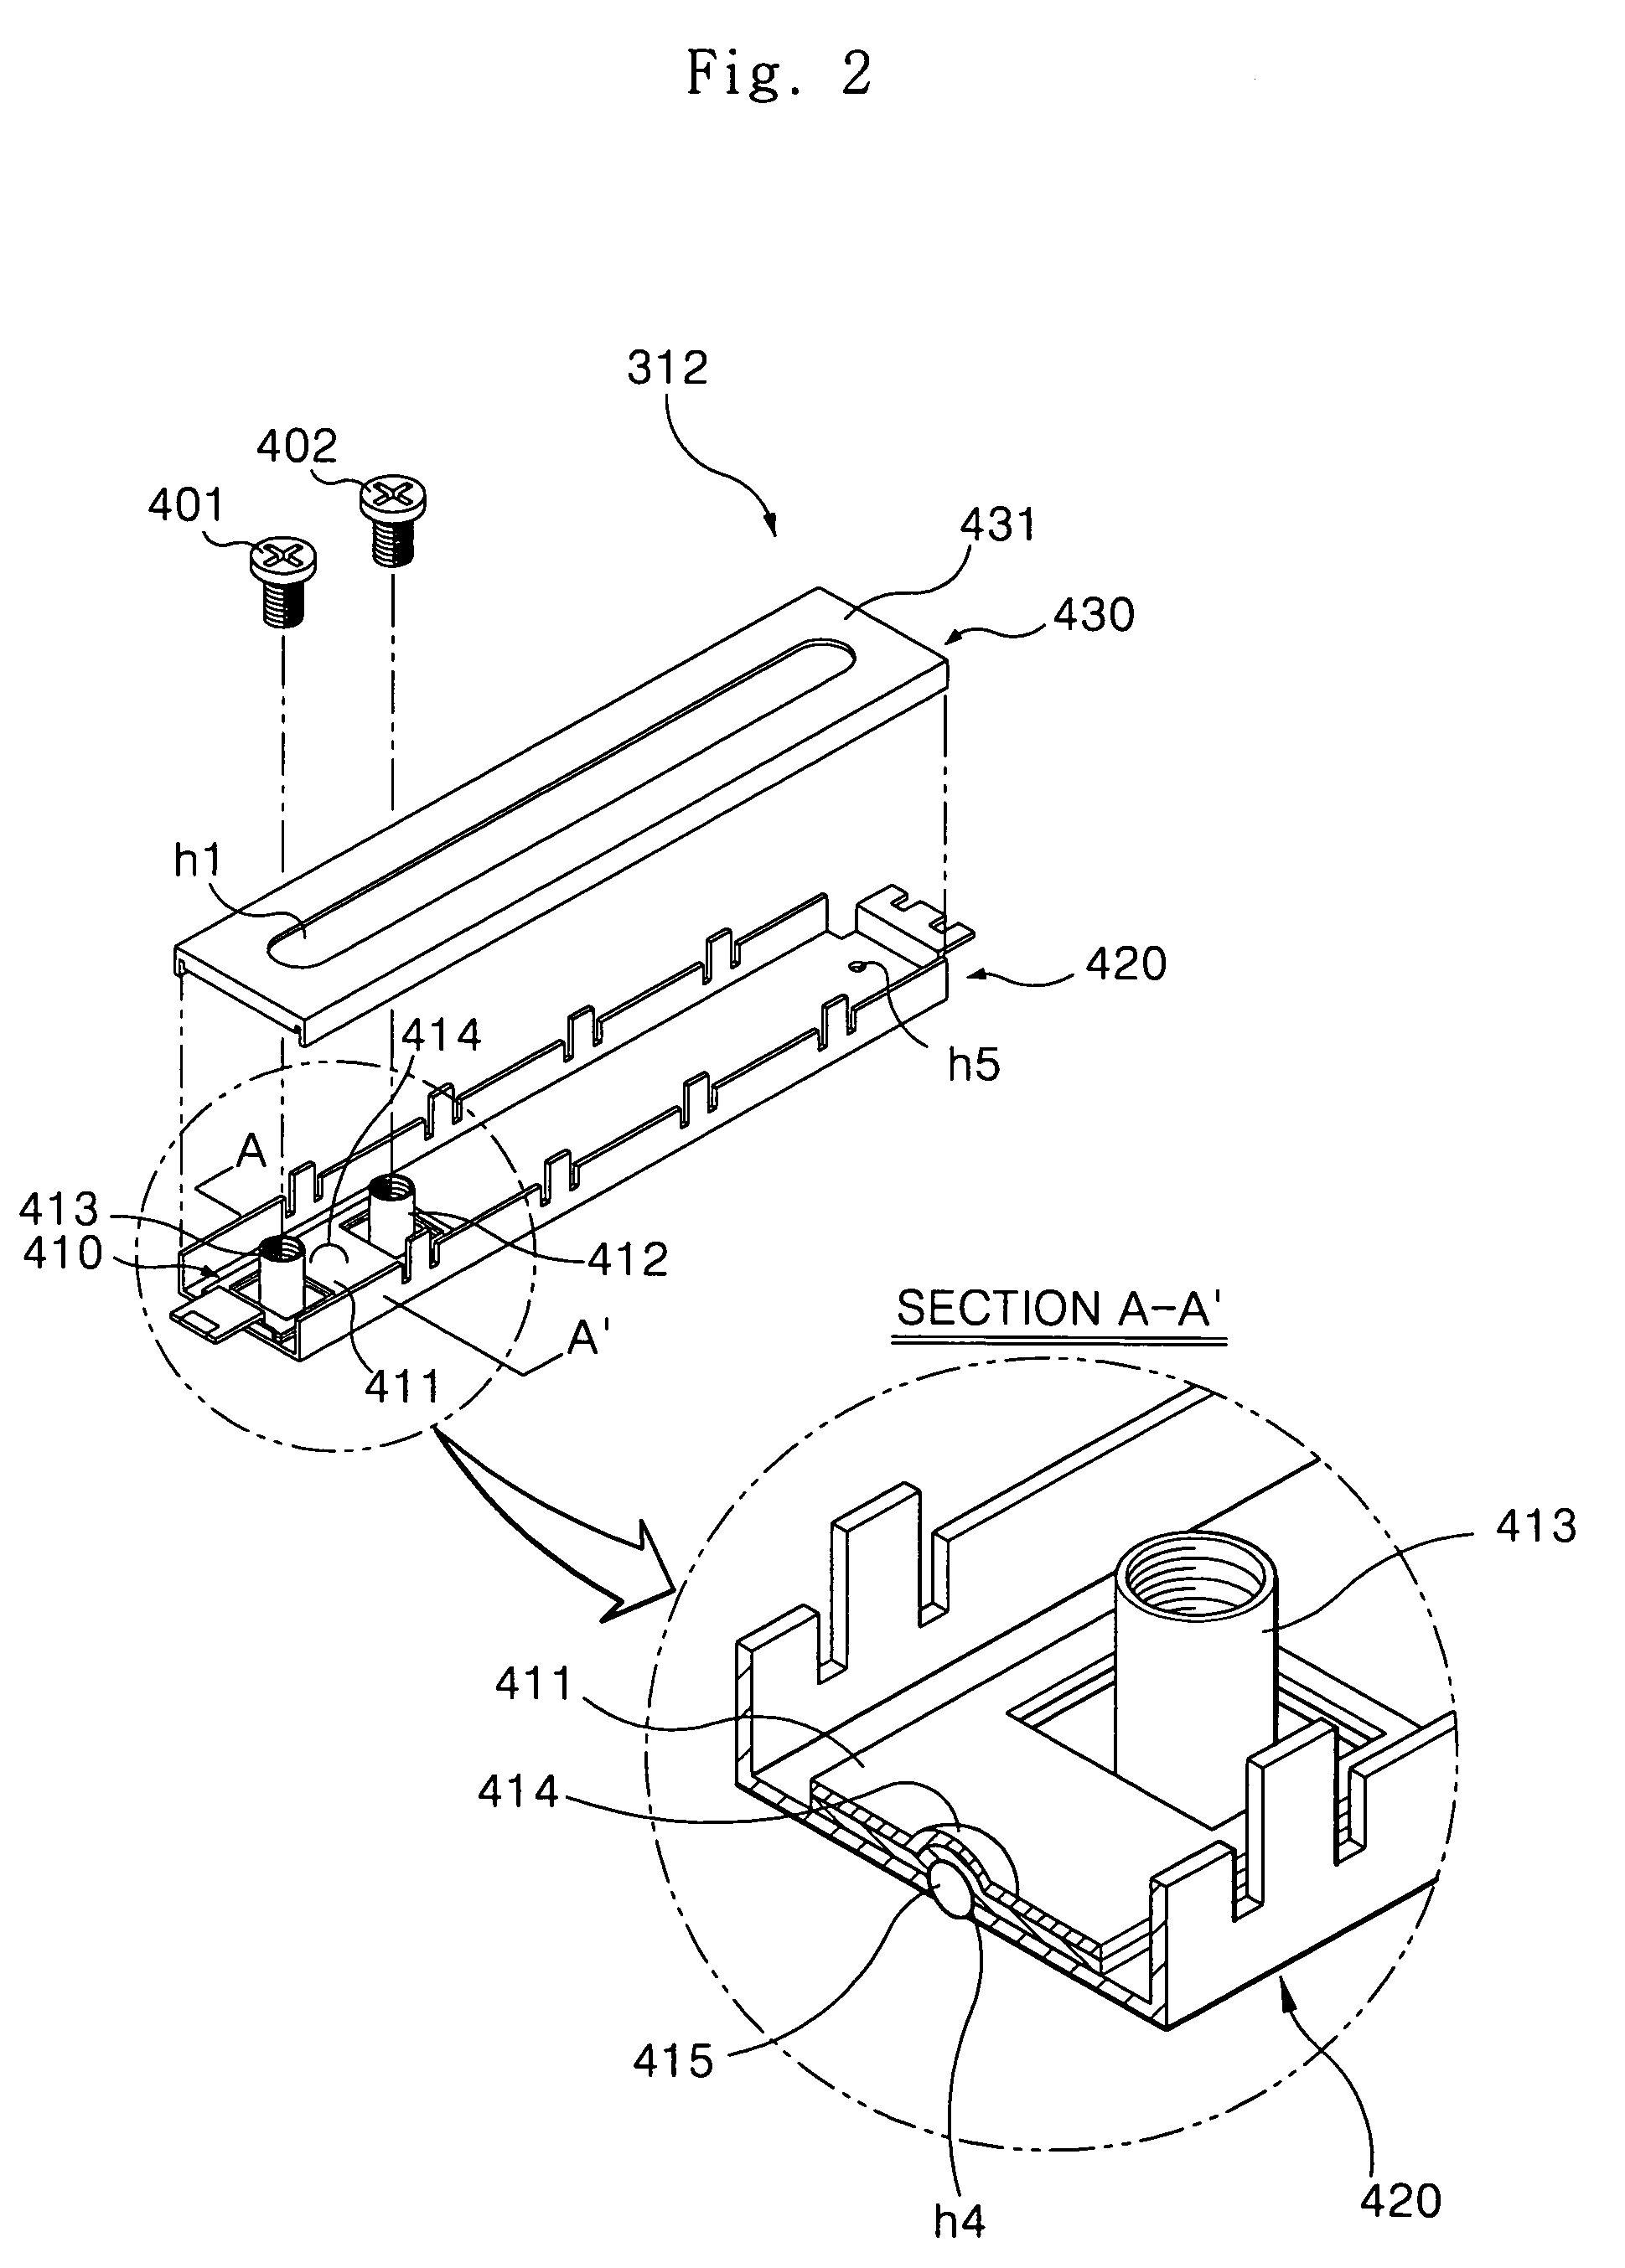 Apparatus for opening and closing cover of cellular phone